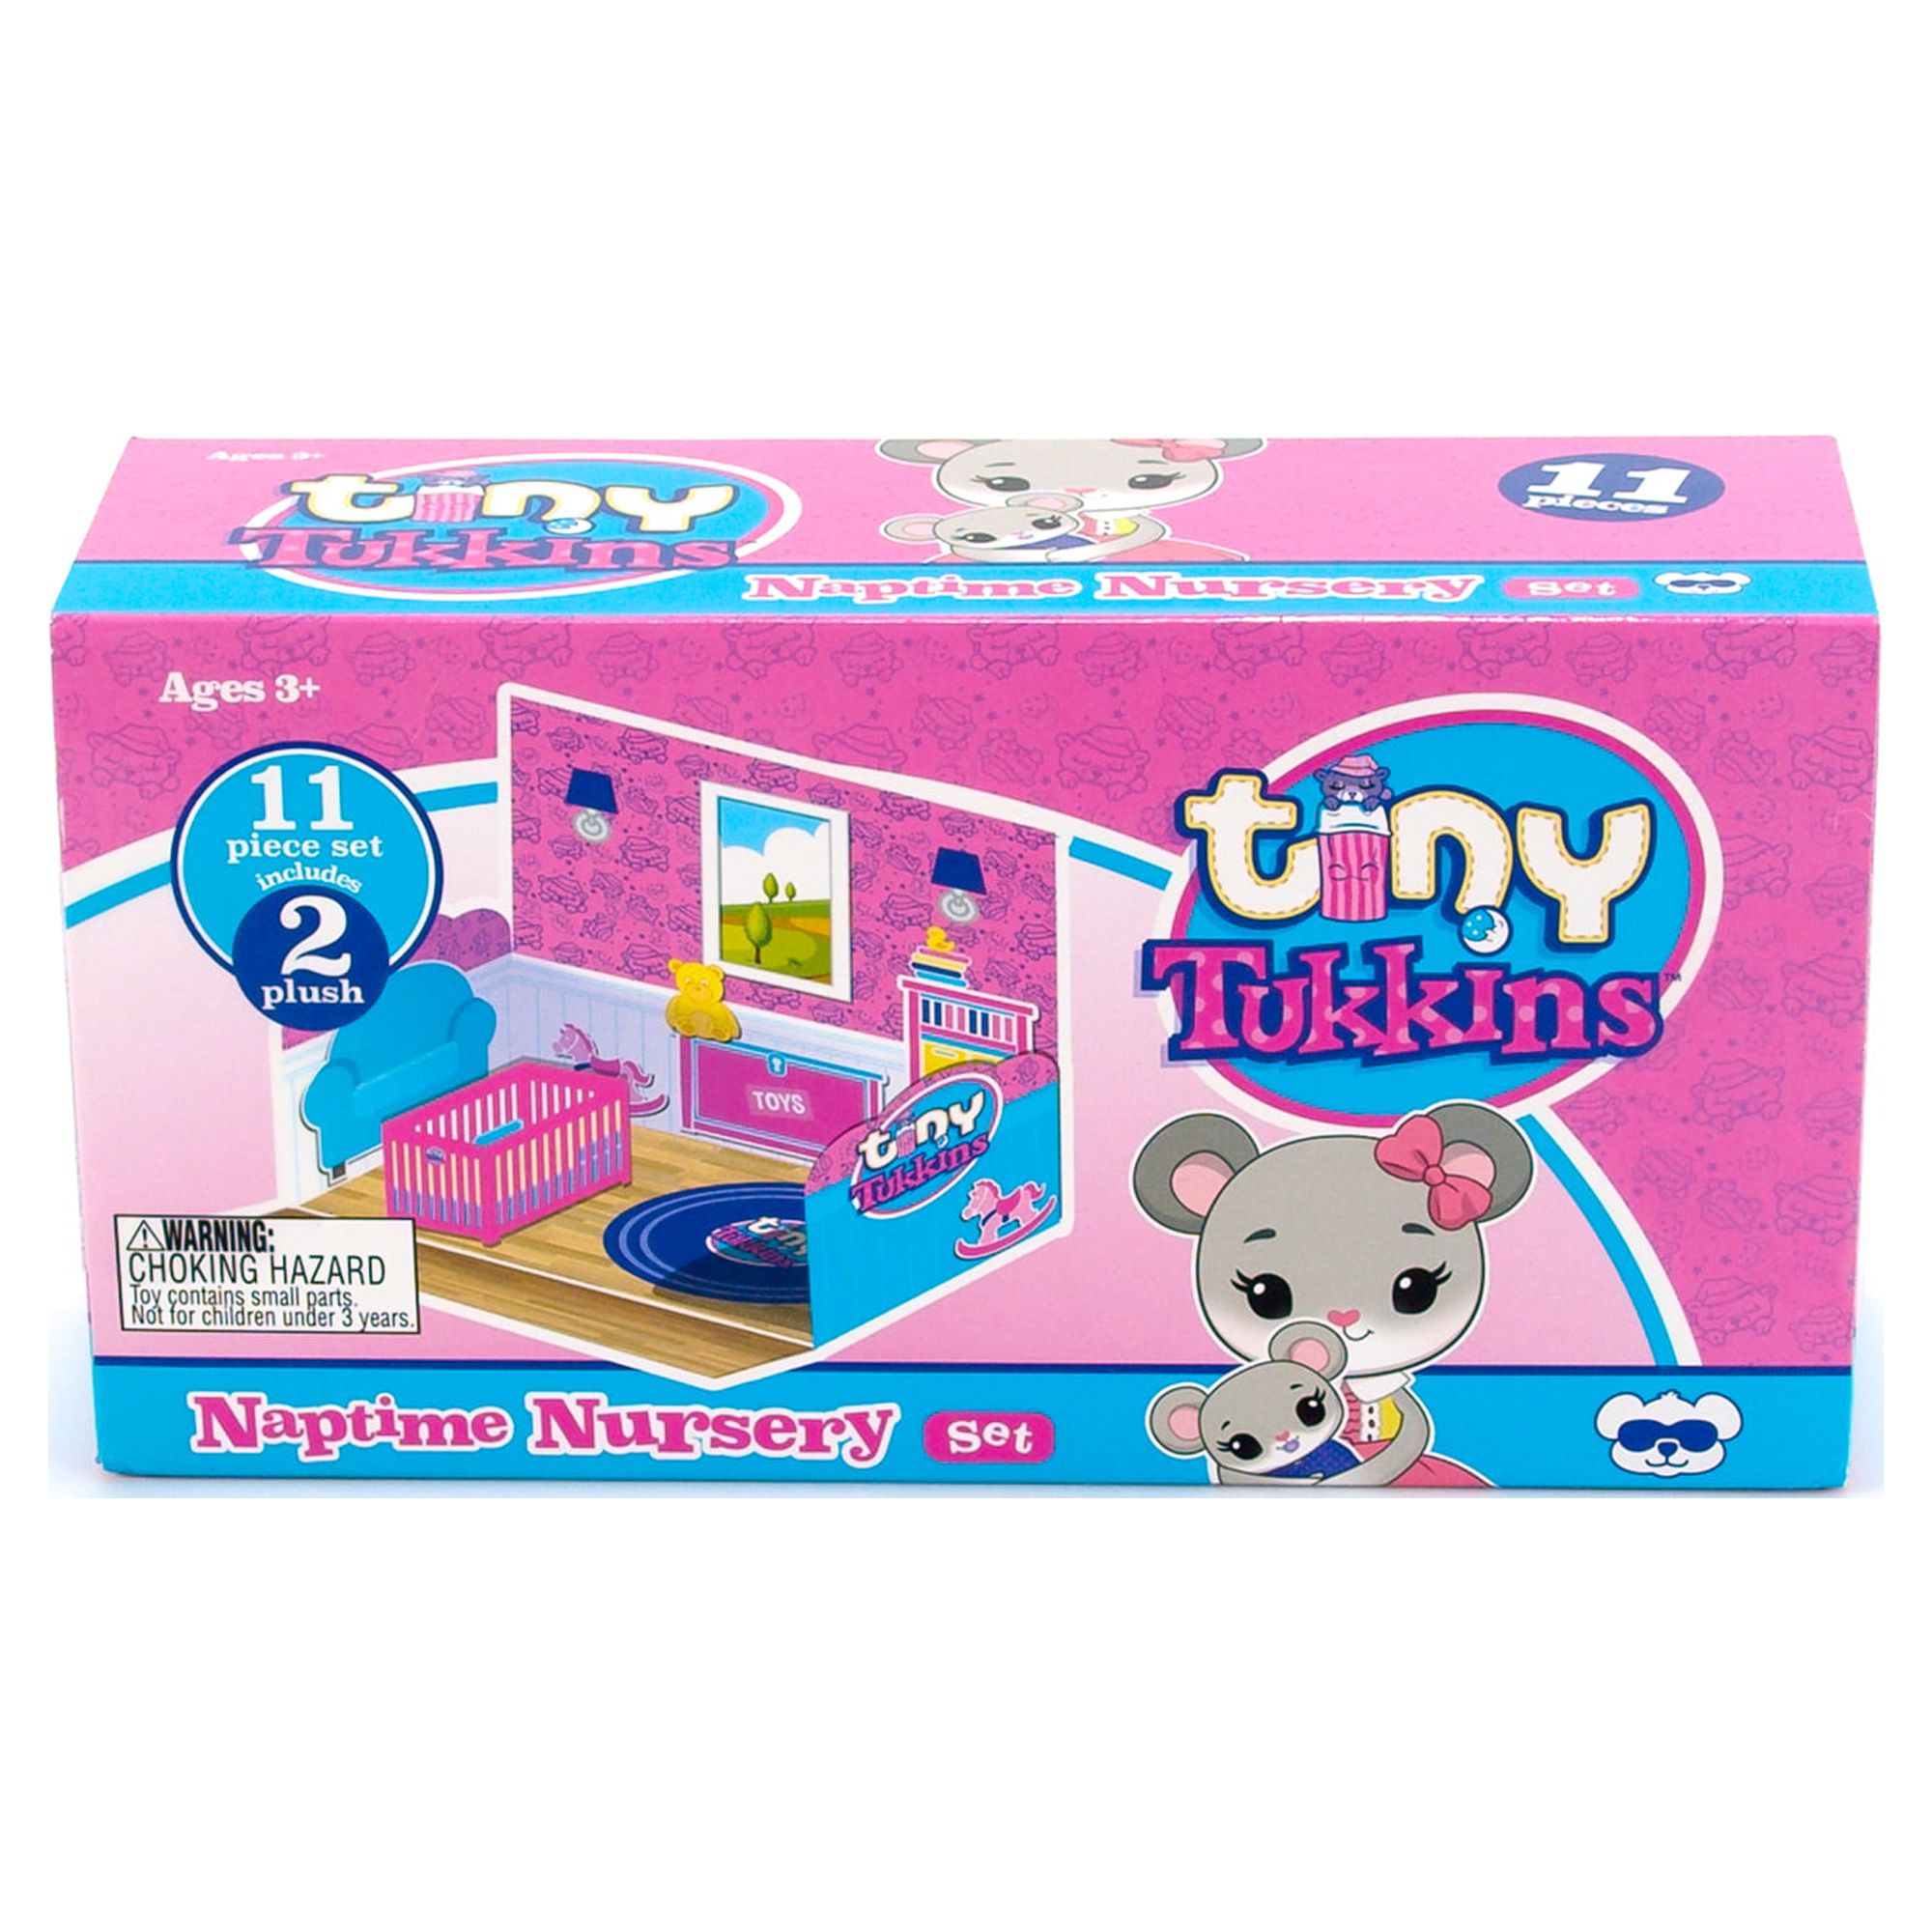 Tiny Tukkins Playset Assortment with Character Mouse Stuffed Animals - image 3 of 7